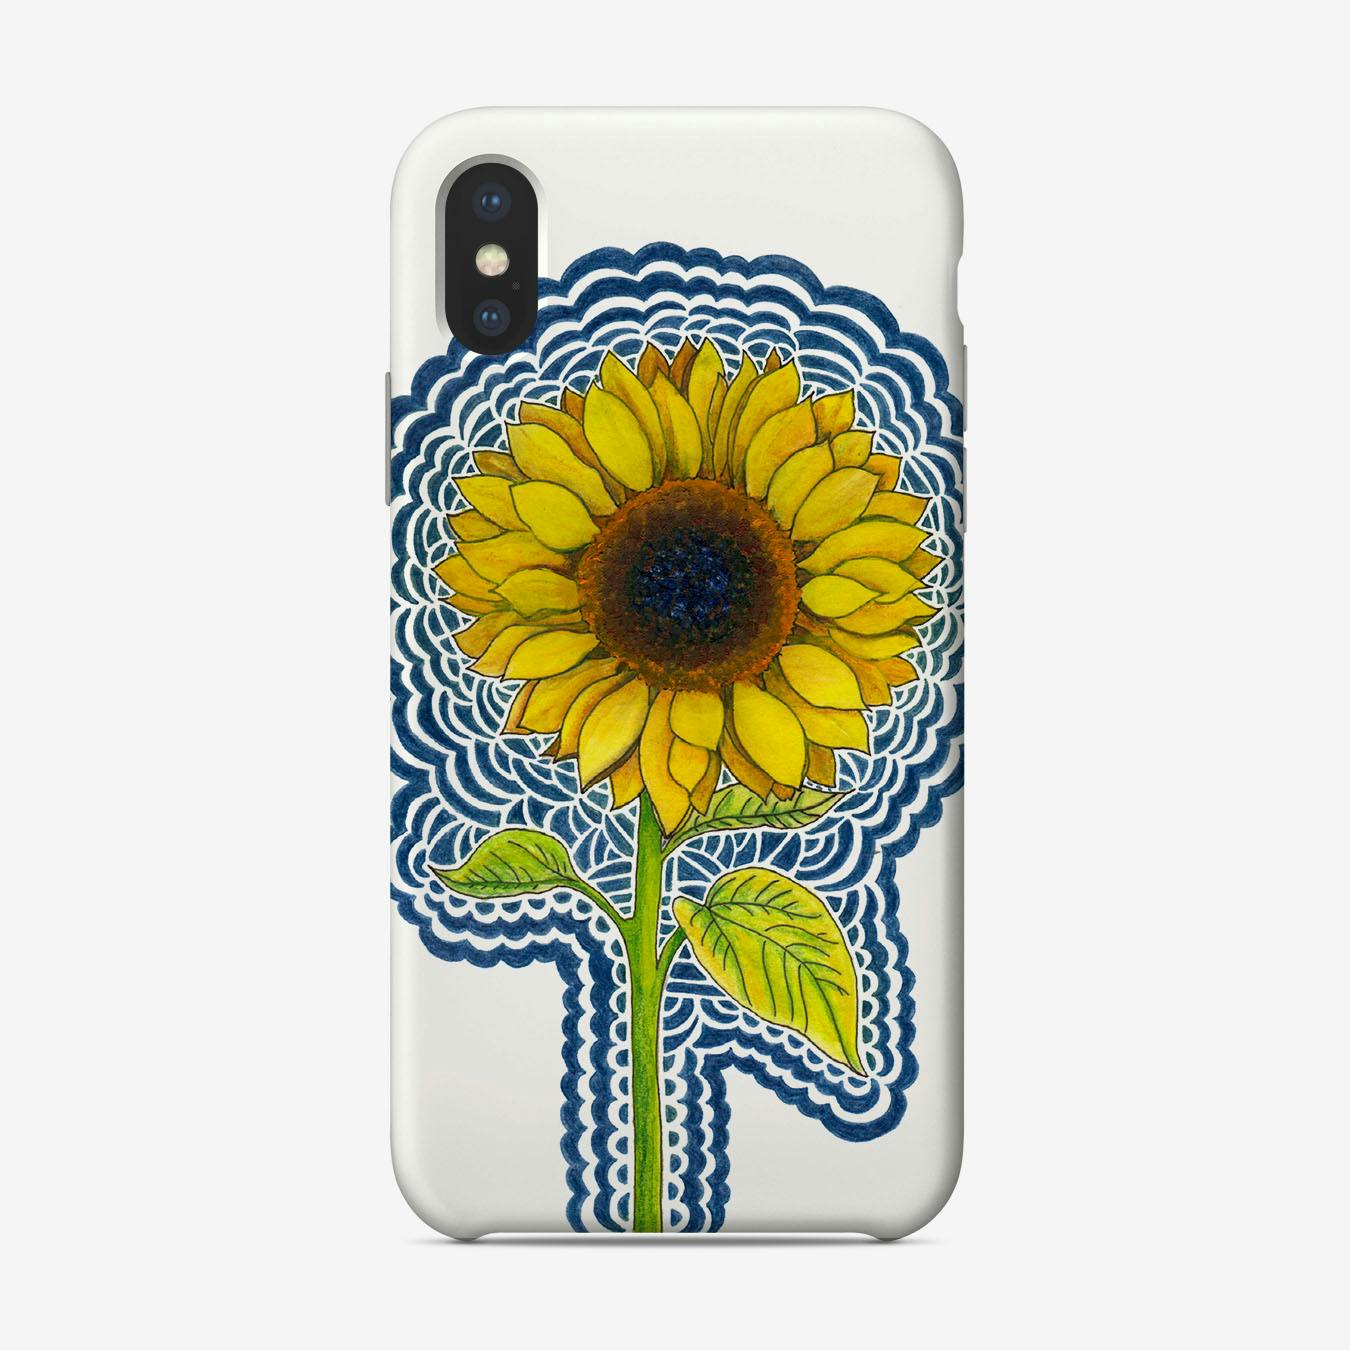 Sunflower Drawing Meditation Phone Case By Kp Design Fy